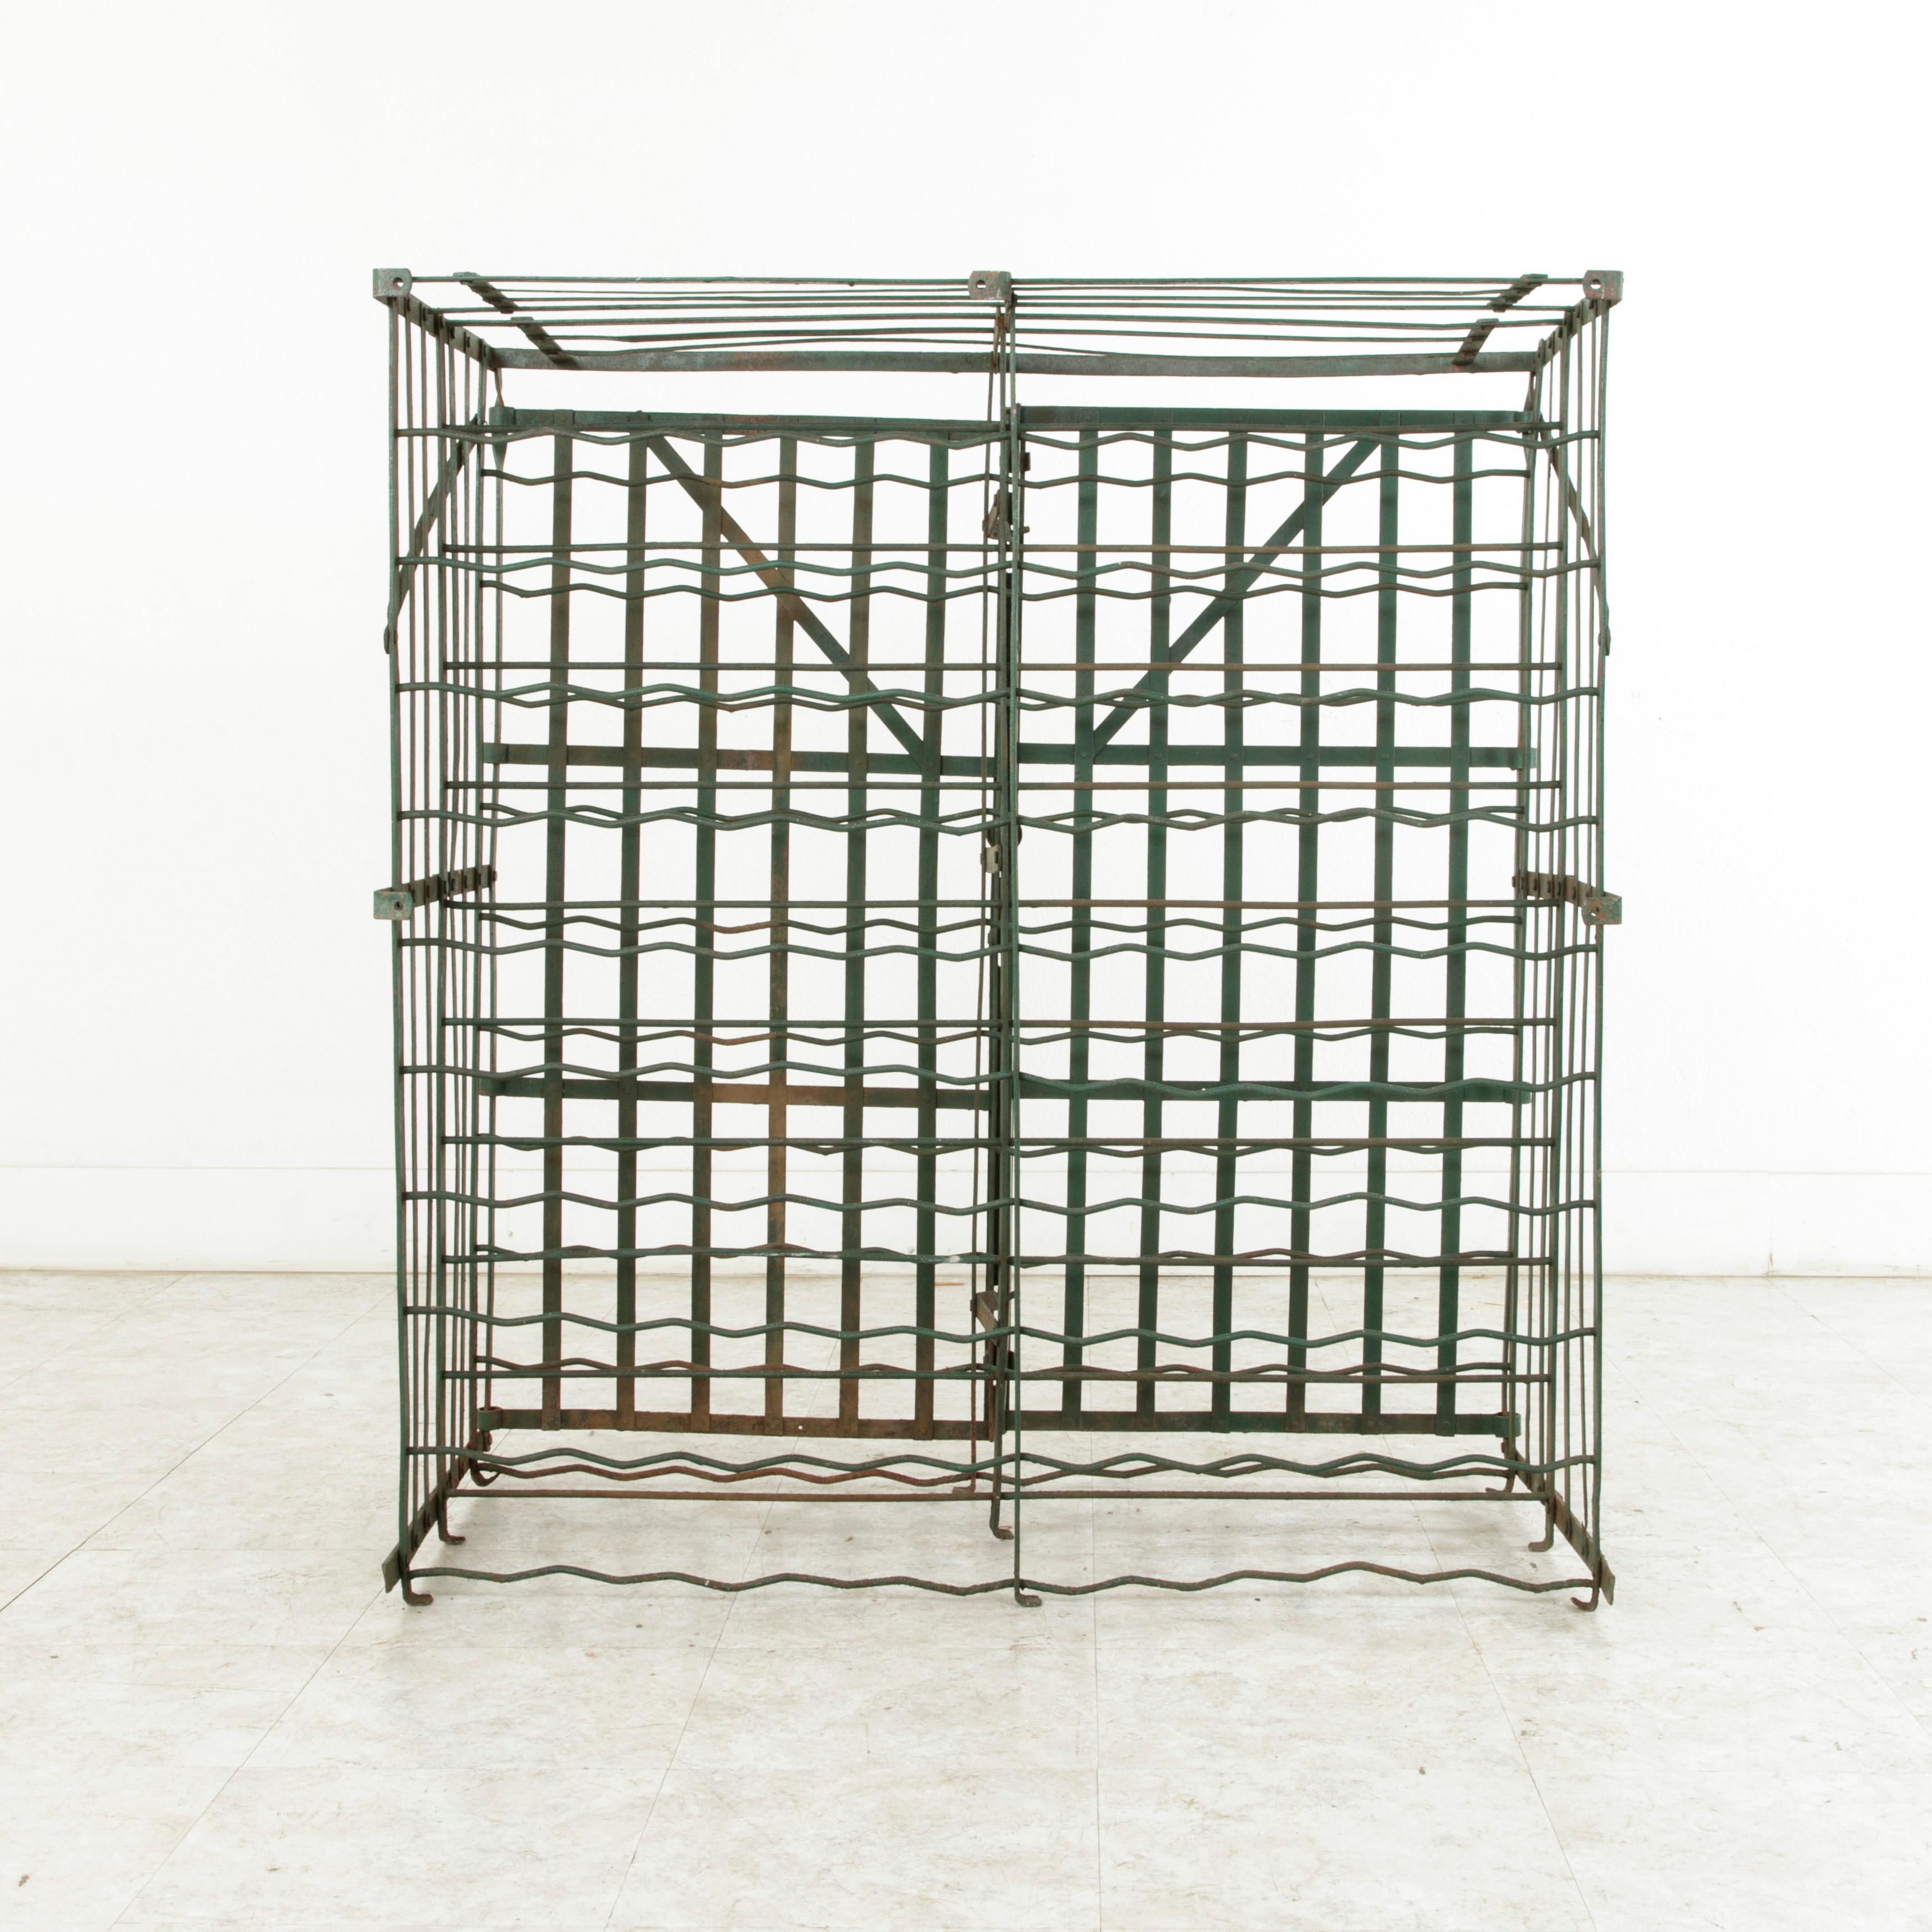 Early 20th Century French Riveted Iron Wine Cage or Wine Cellar for 200 Bottles 2